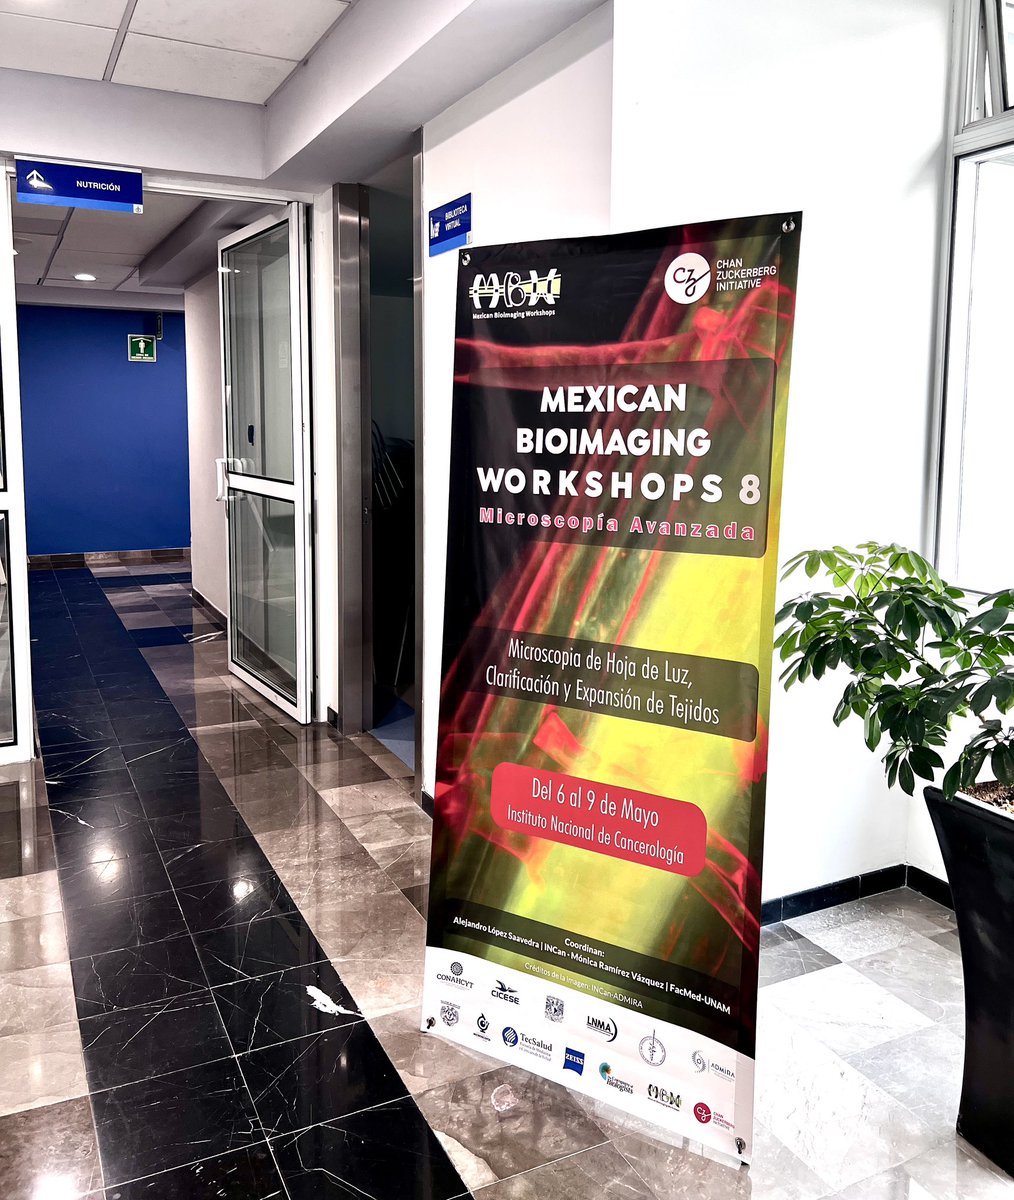 It’s here!! The 8th Mexican Bioimaging workshops #MBW8. Thank you #incan #chanzuckerberginitiative #mexicobioimaging. Eager to learn more about #lightsheet #microscospy